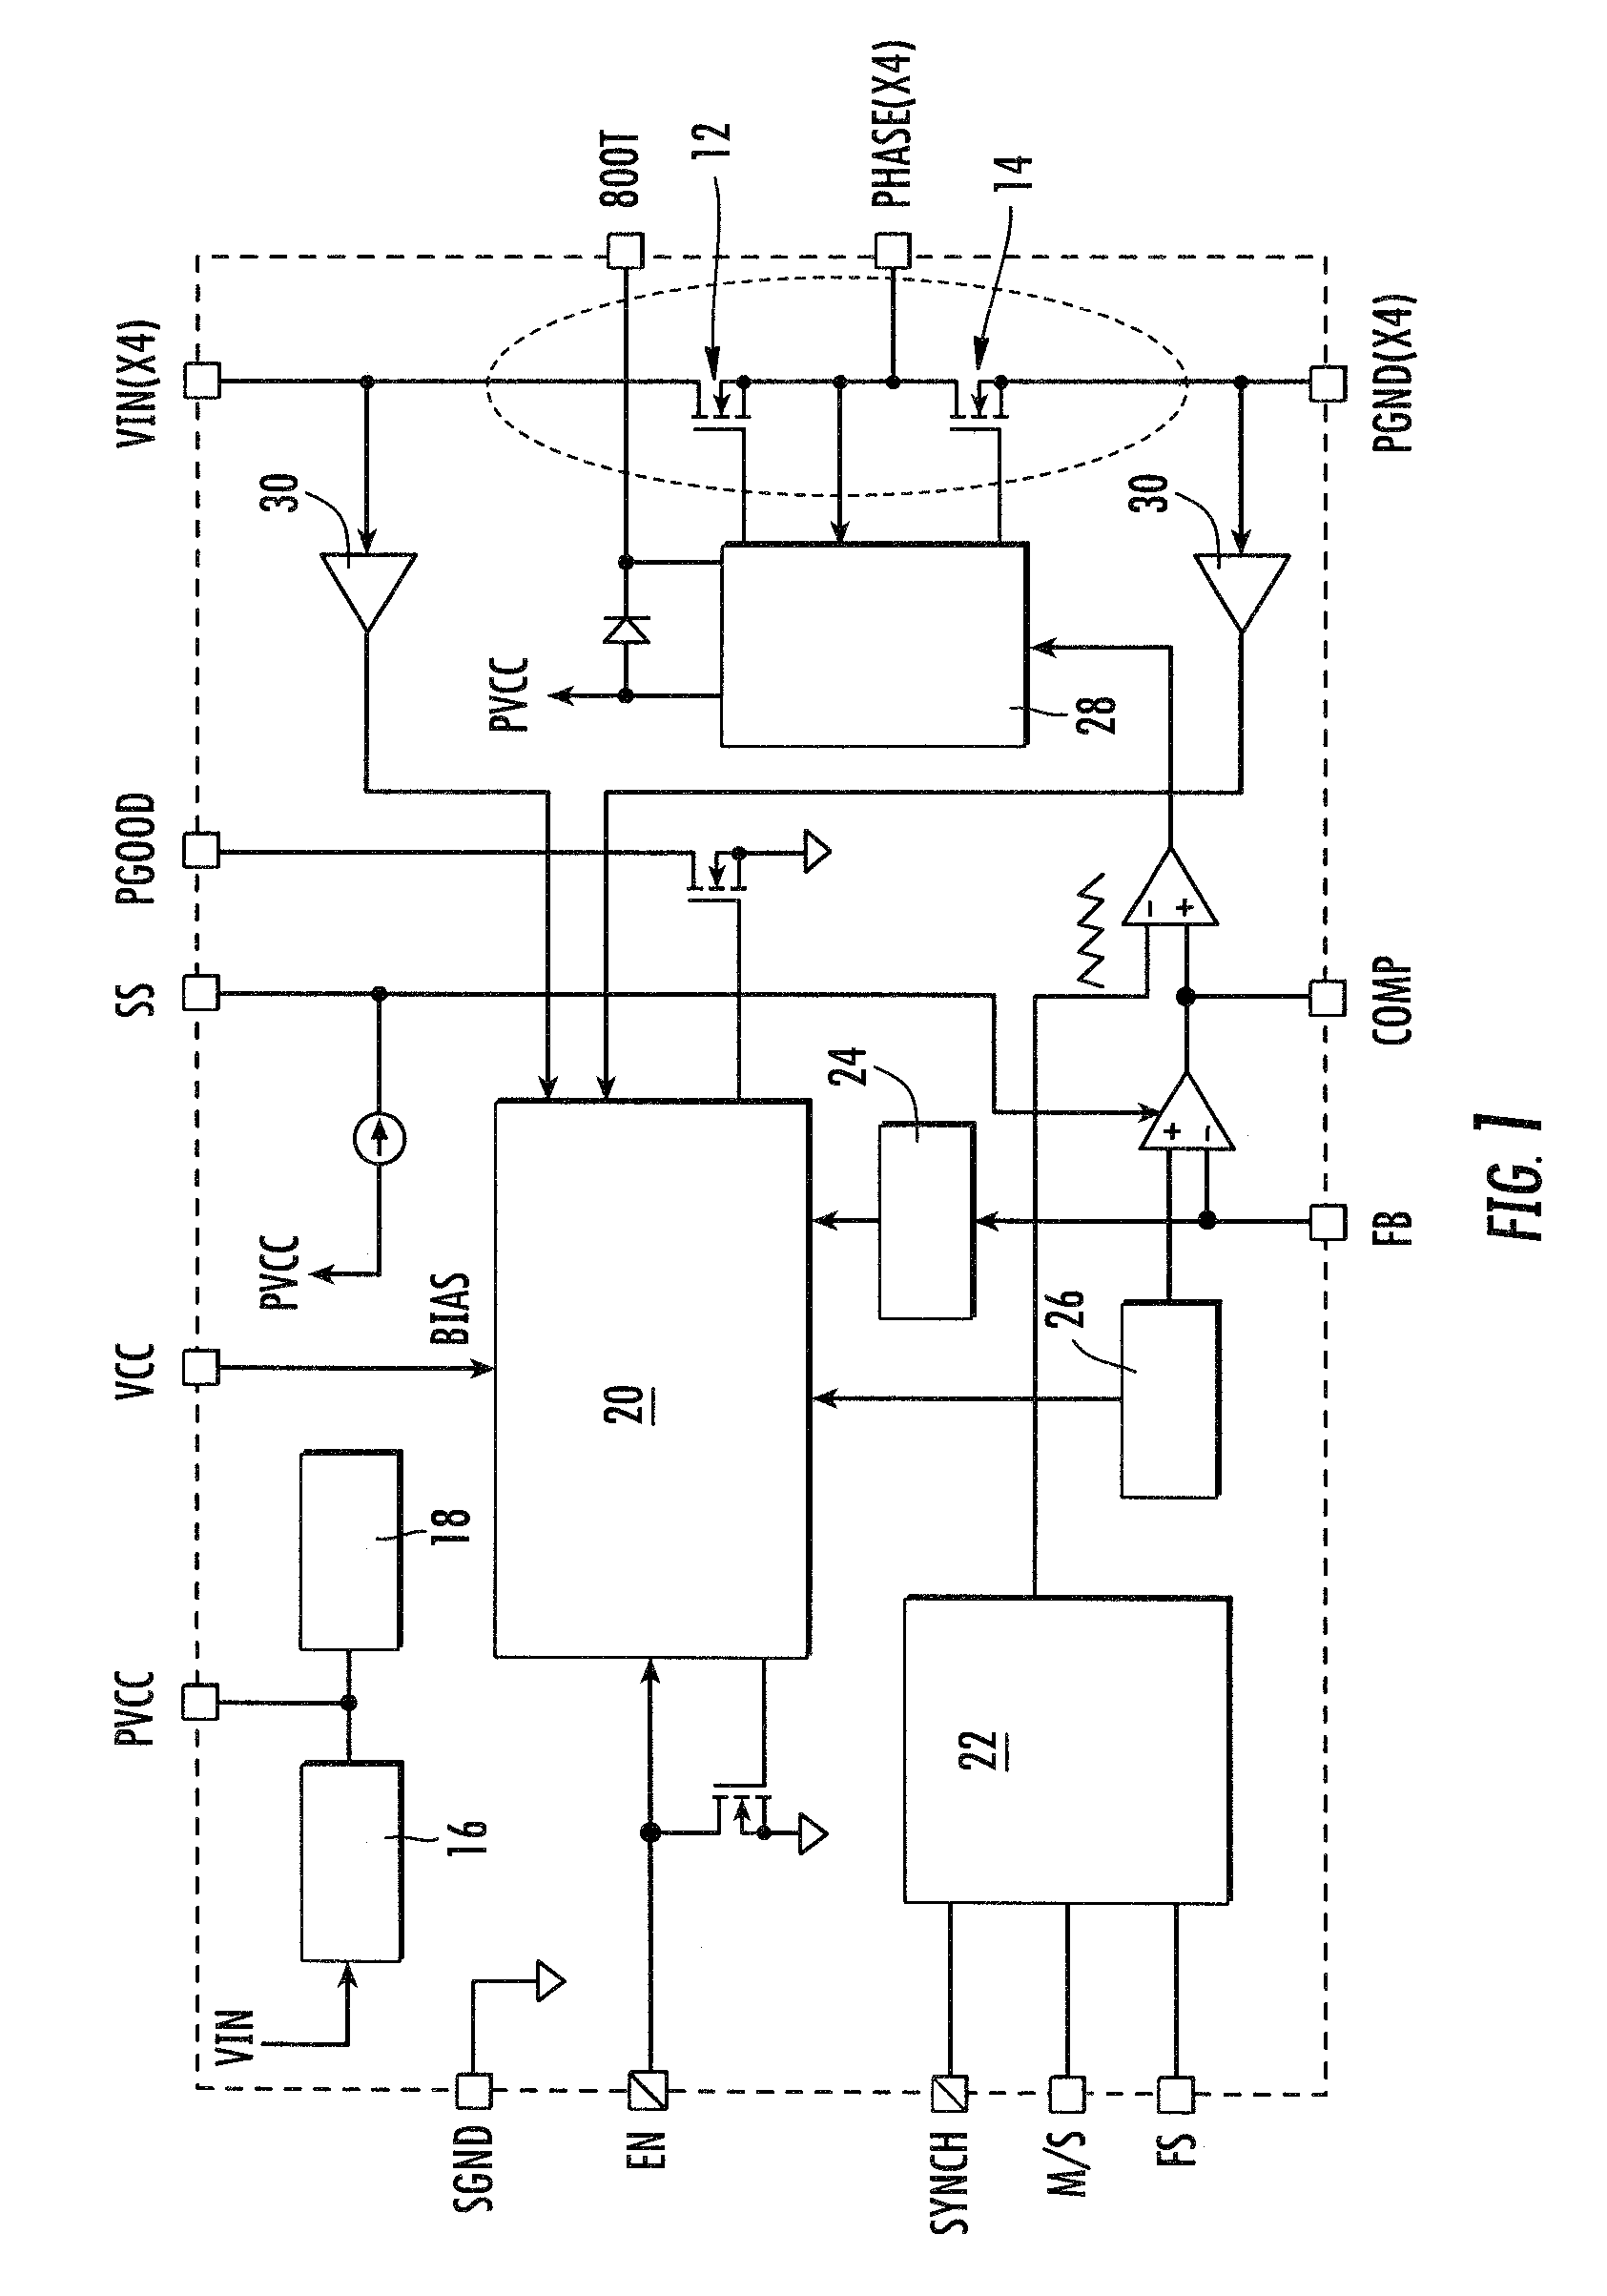 Co-packaging approach for power converters based on planar devices, structure and method